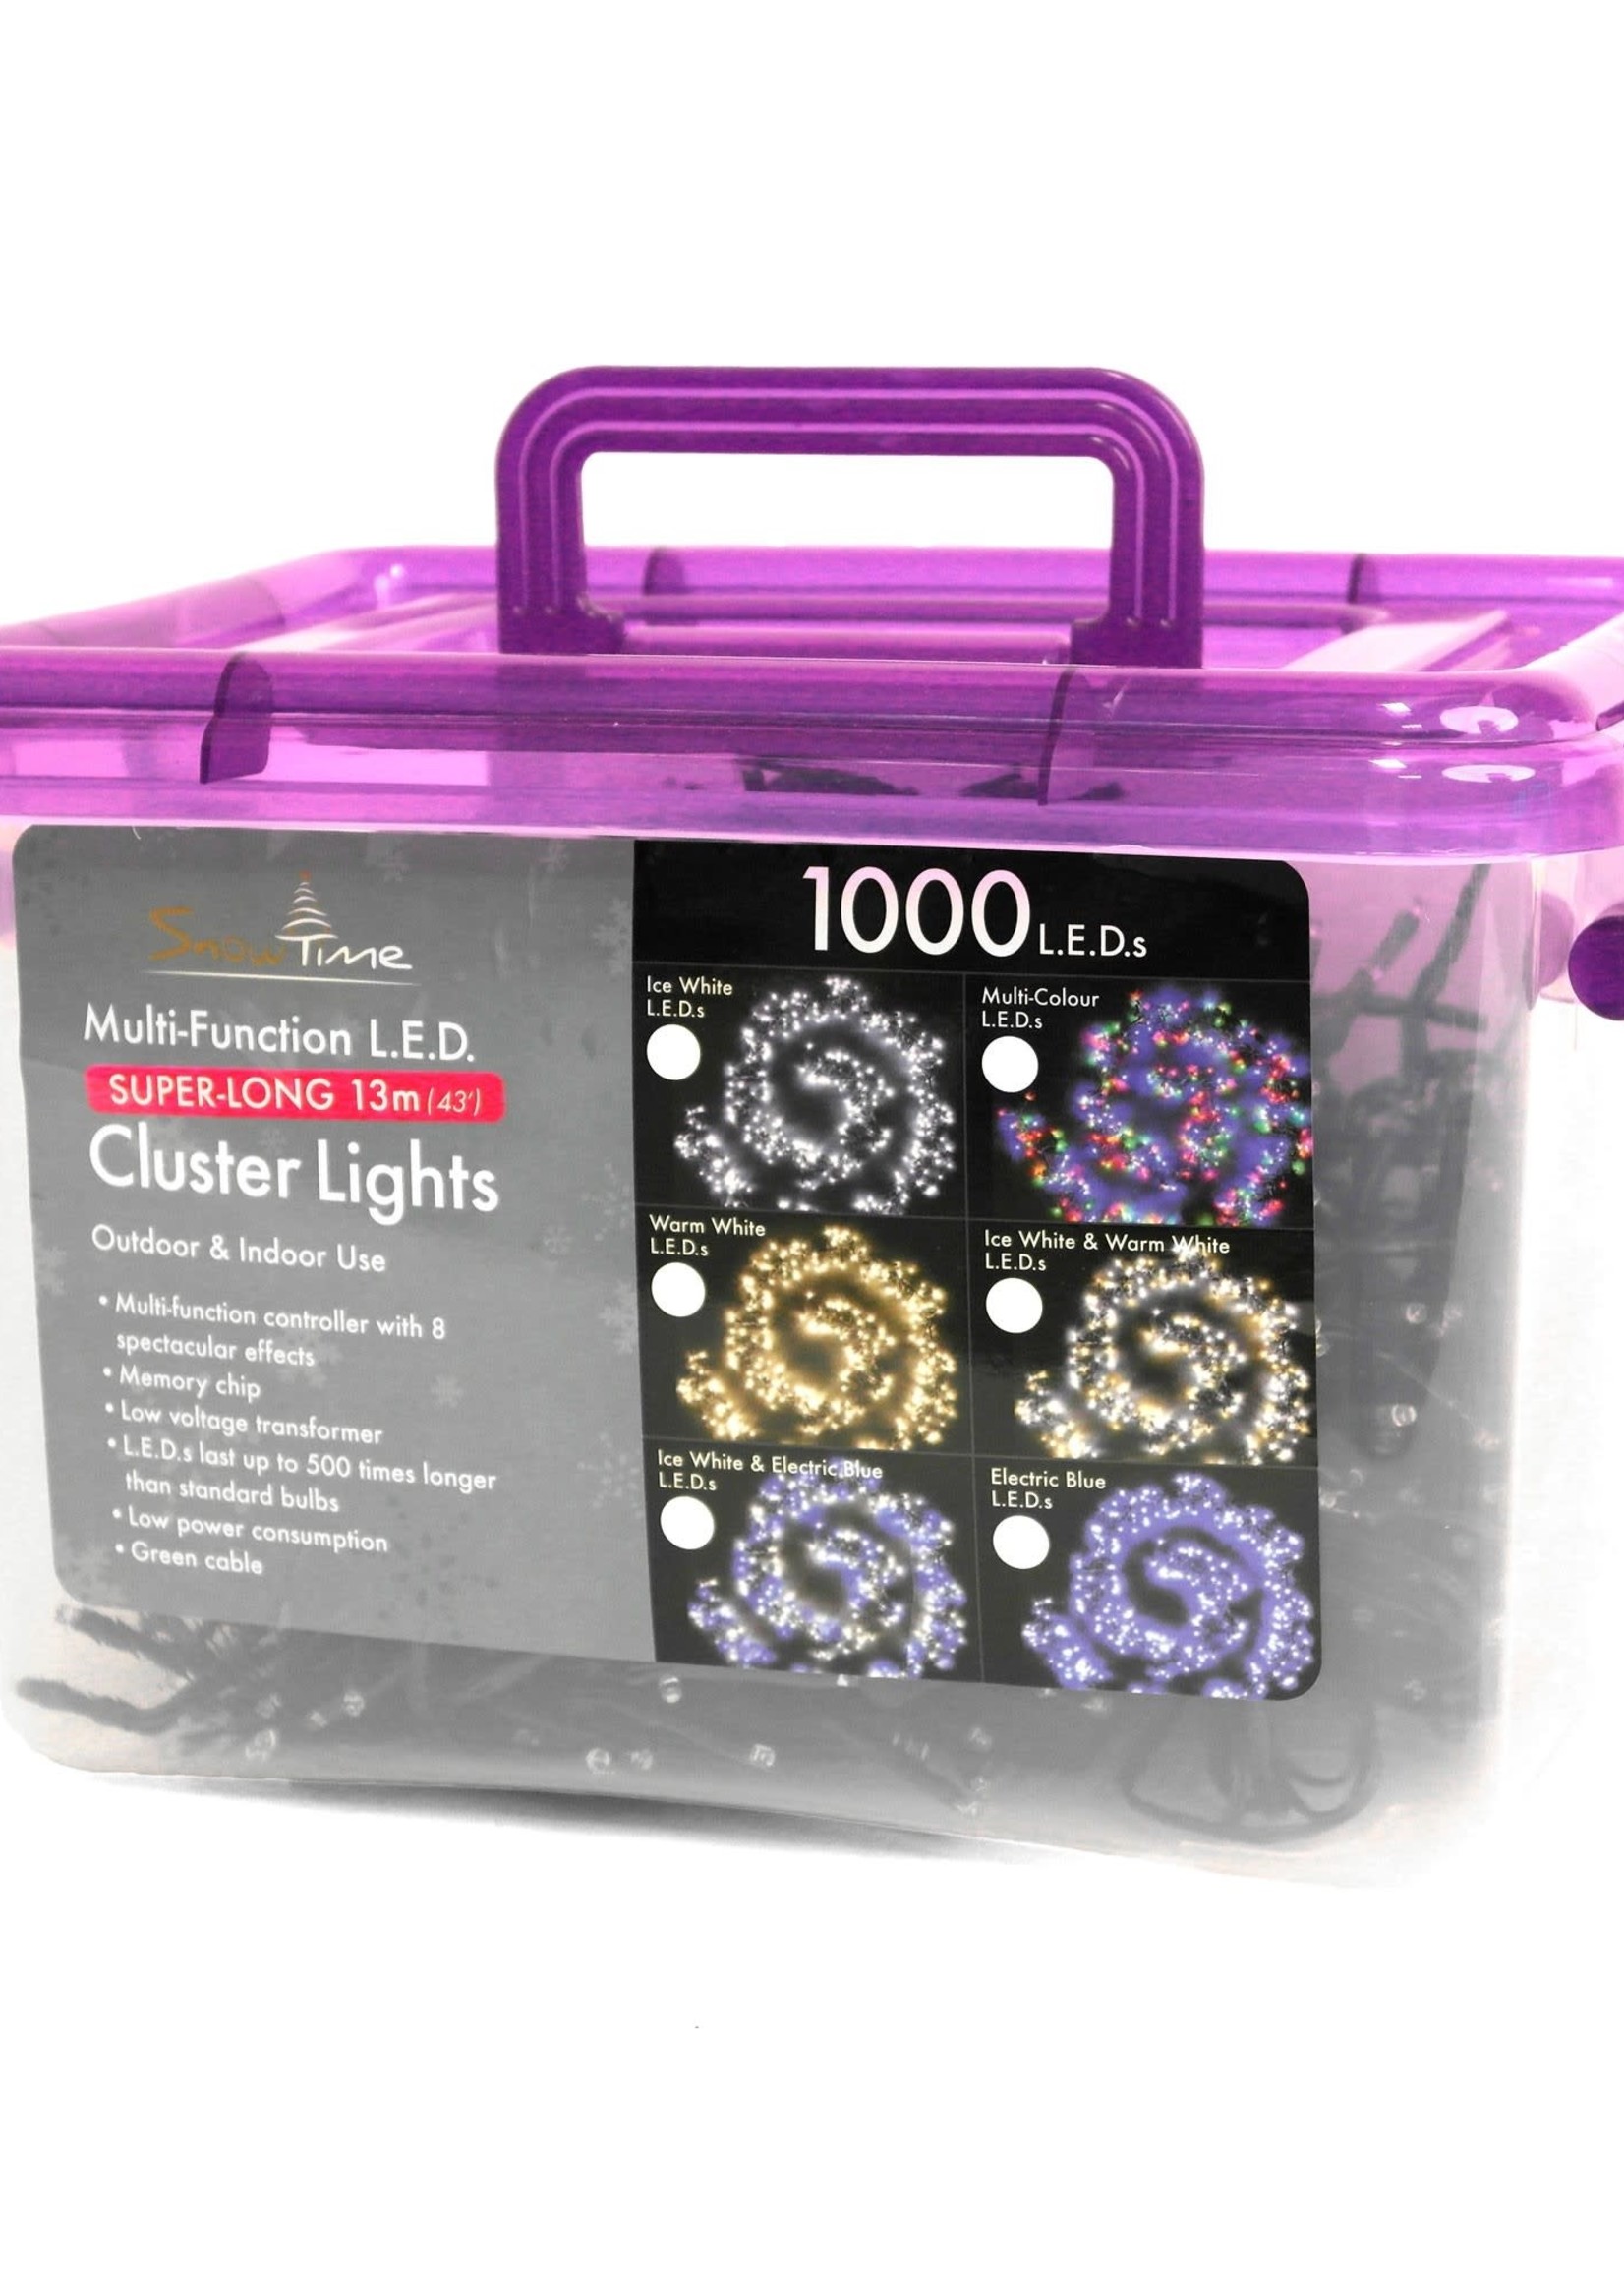 Snowtime Cluster Lights - Multi Function